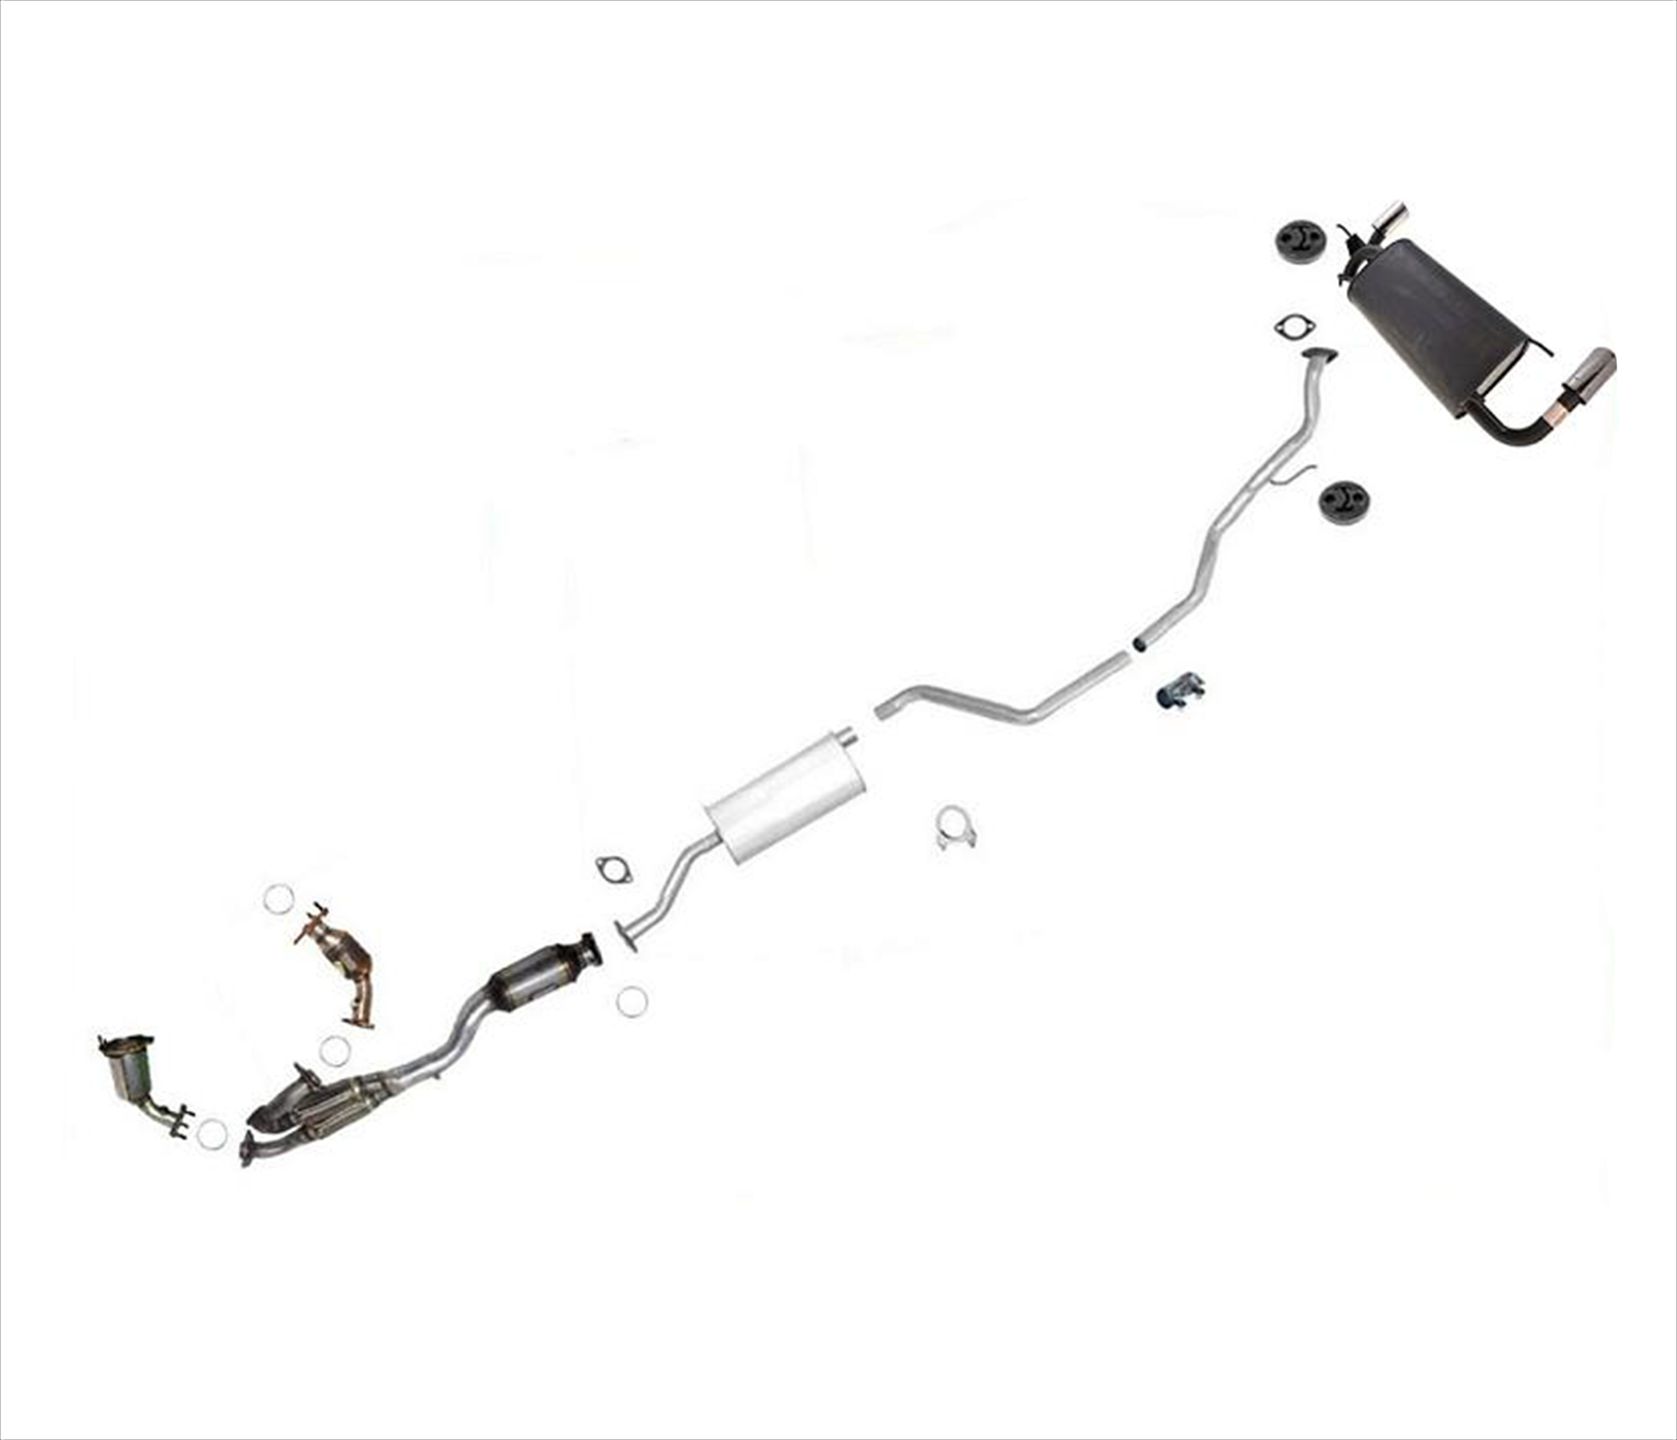 Complete Exhaust System W/ Chrome Tips for Nissan Murano 2003-2007 | eBay